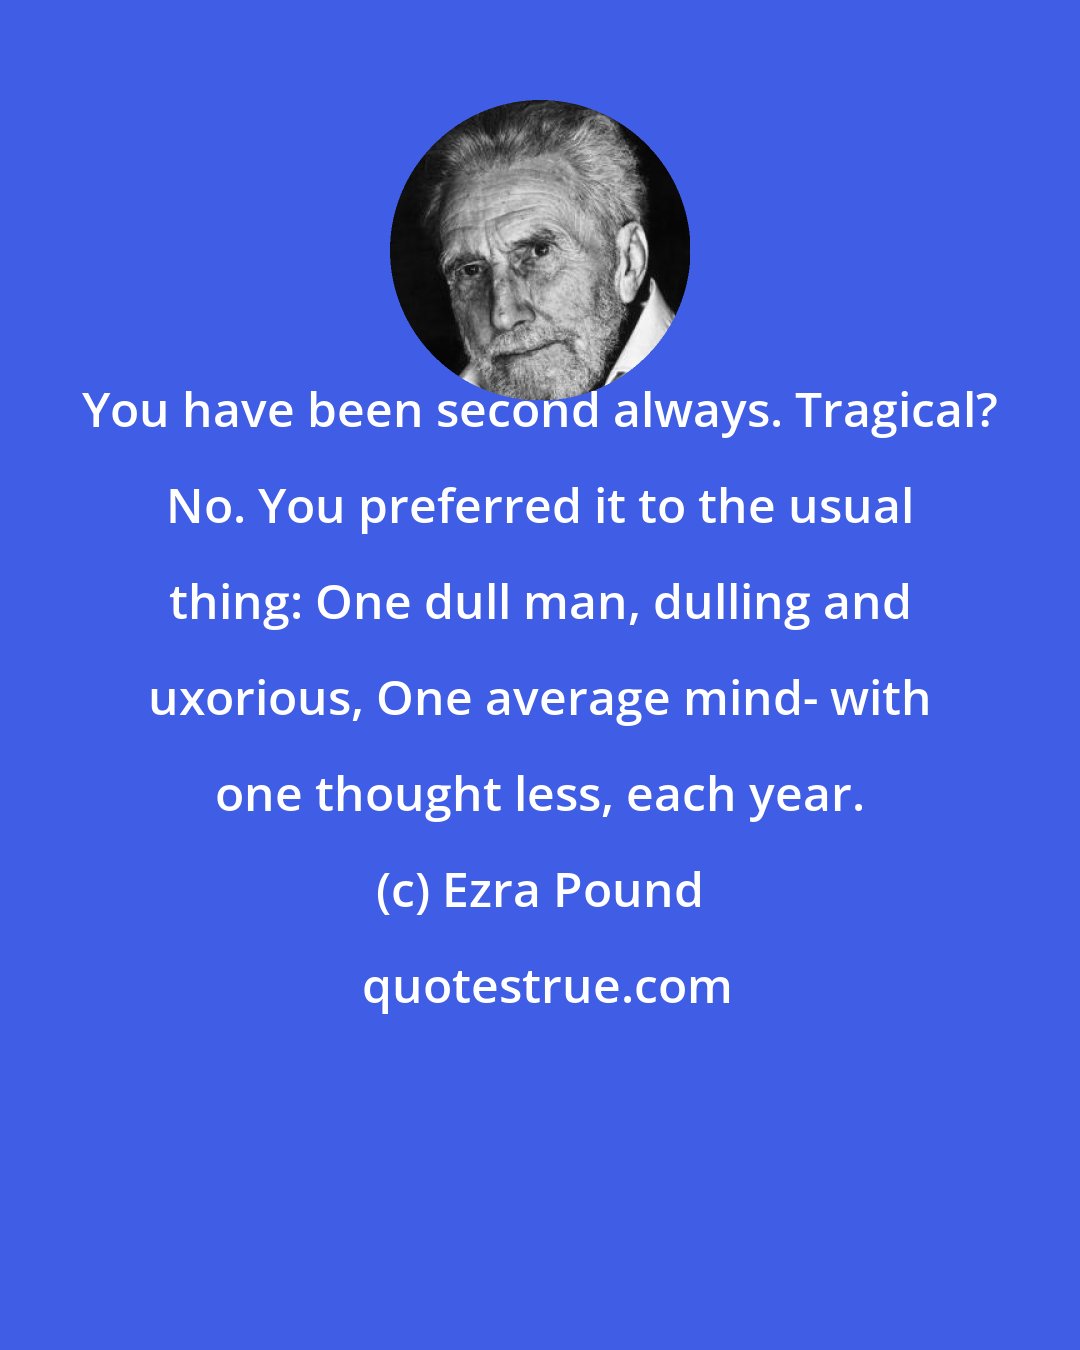 Ezra Pound: You have been second always. Tragical? No. You preferred it to the usual thing: One dull man, dulling and uxorious, One average mind- with one thought less, each year.